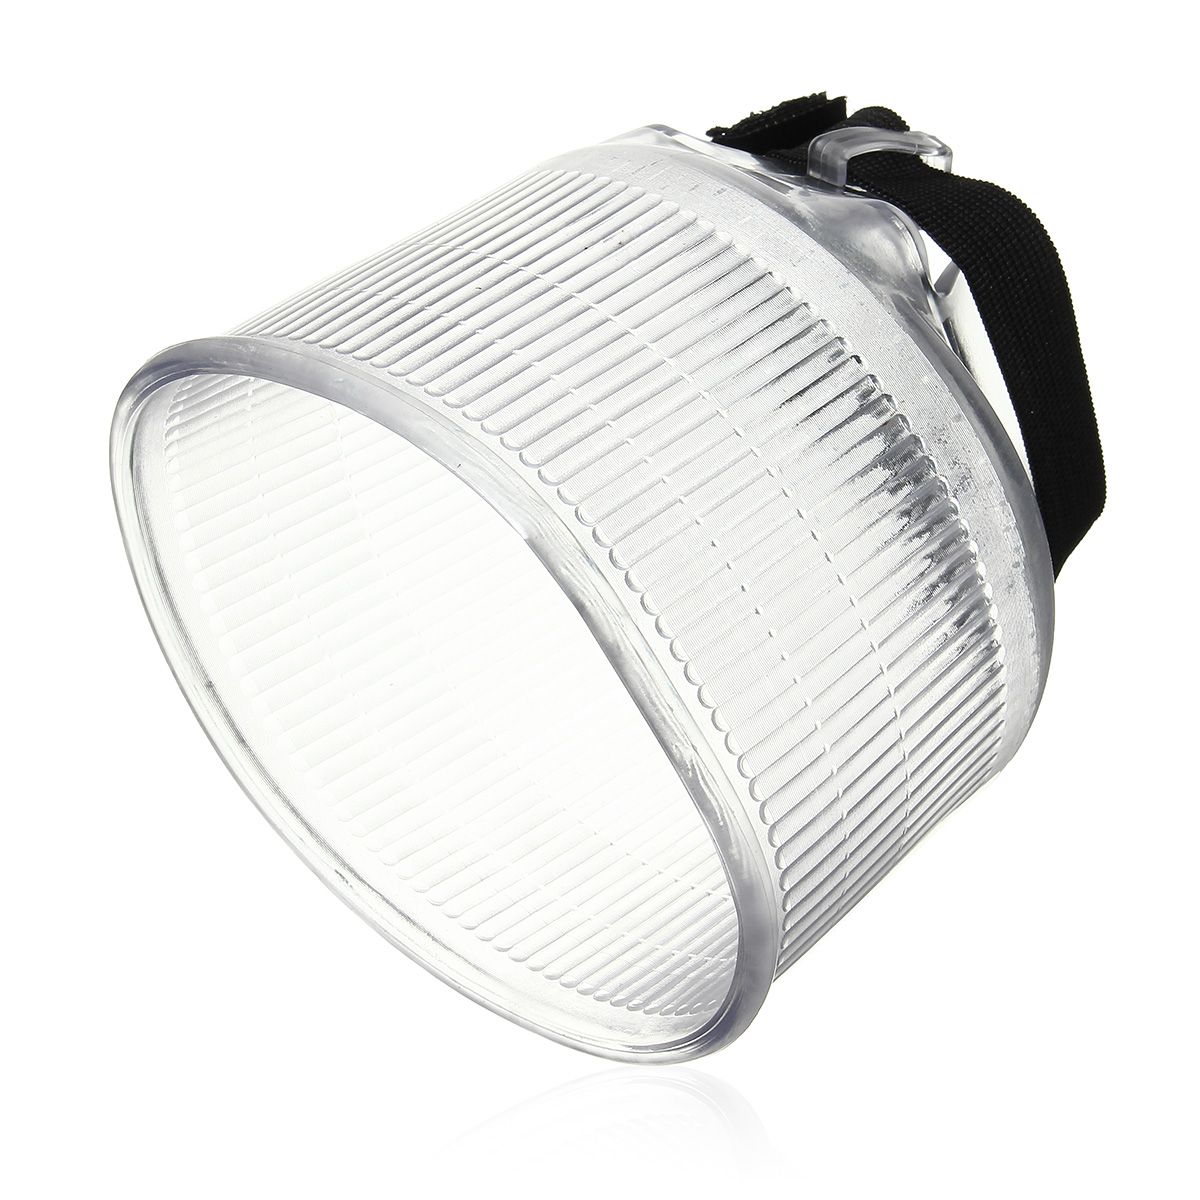 Universal-Cloud-Lambency-Flash-Diffuser-Reflector-White-ABS-with-Dome-Cover-Sets-1158363